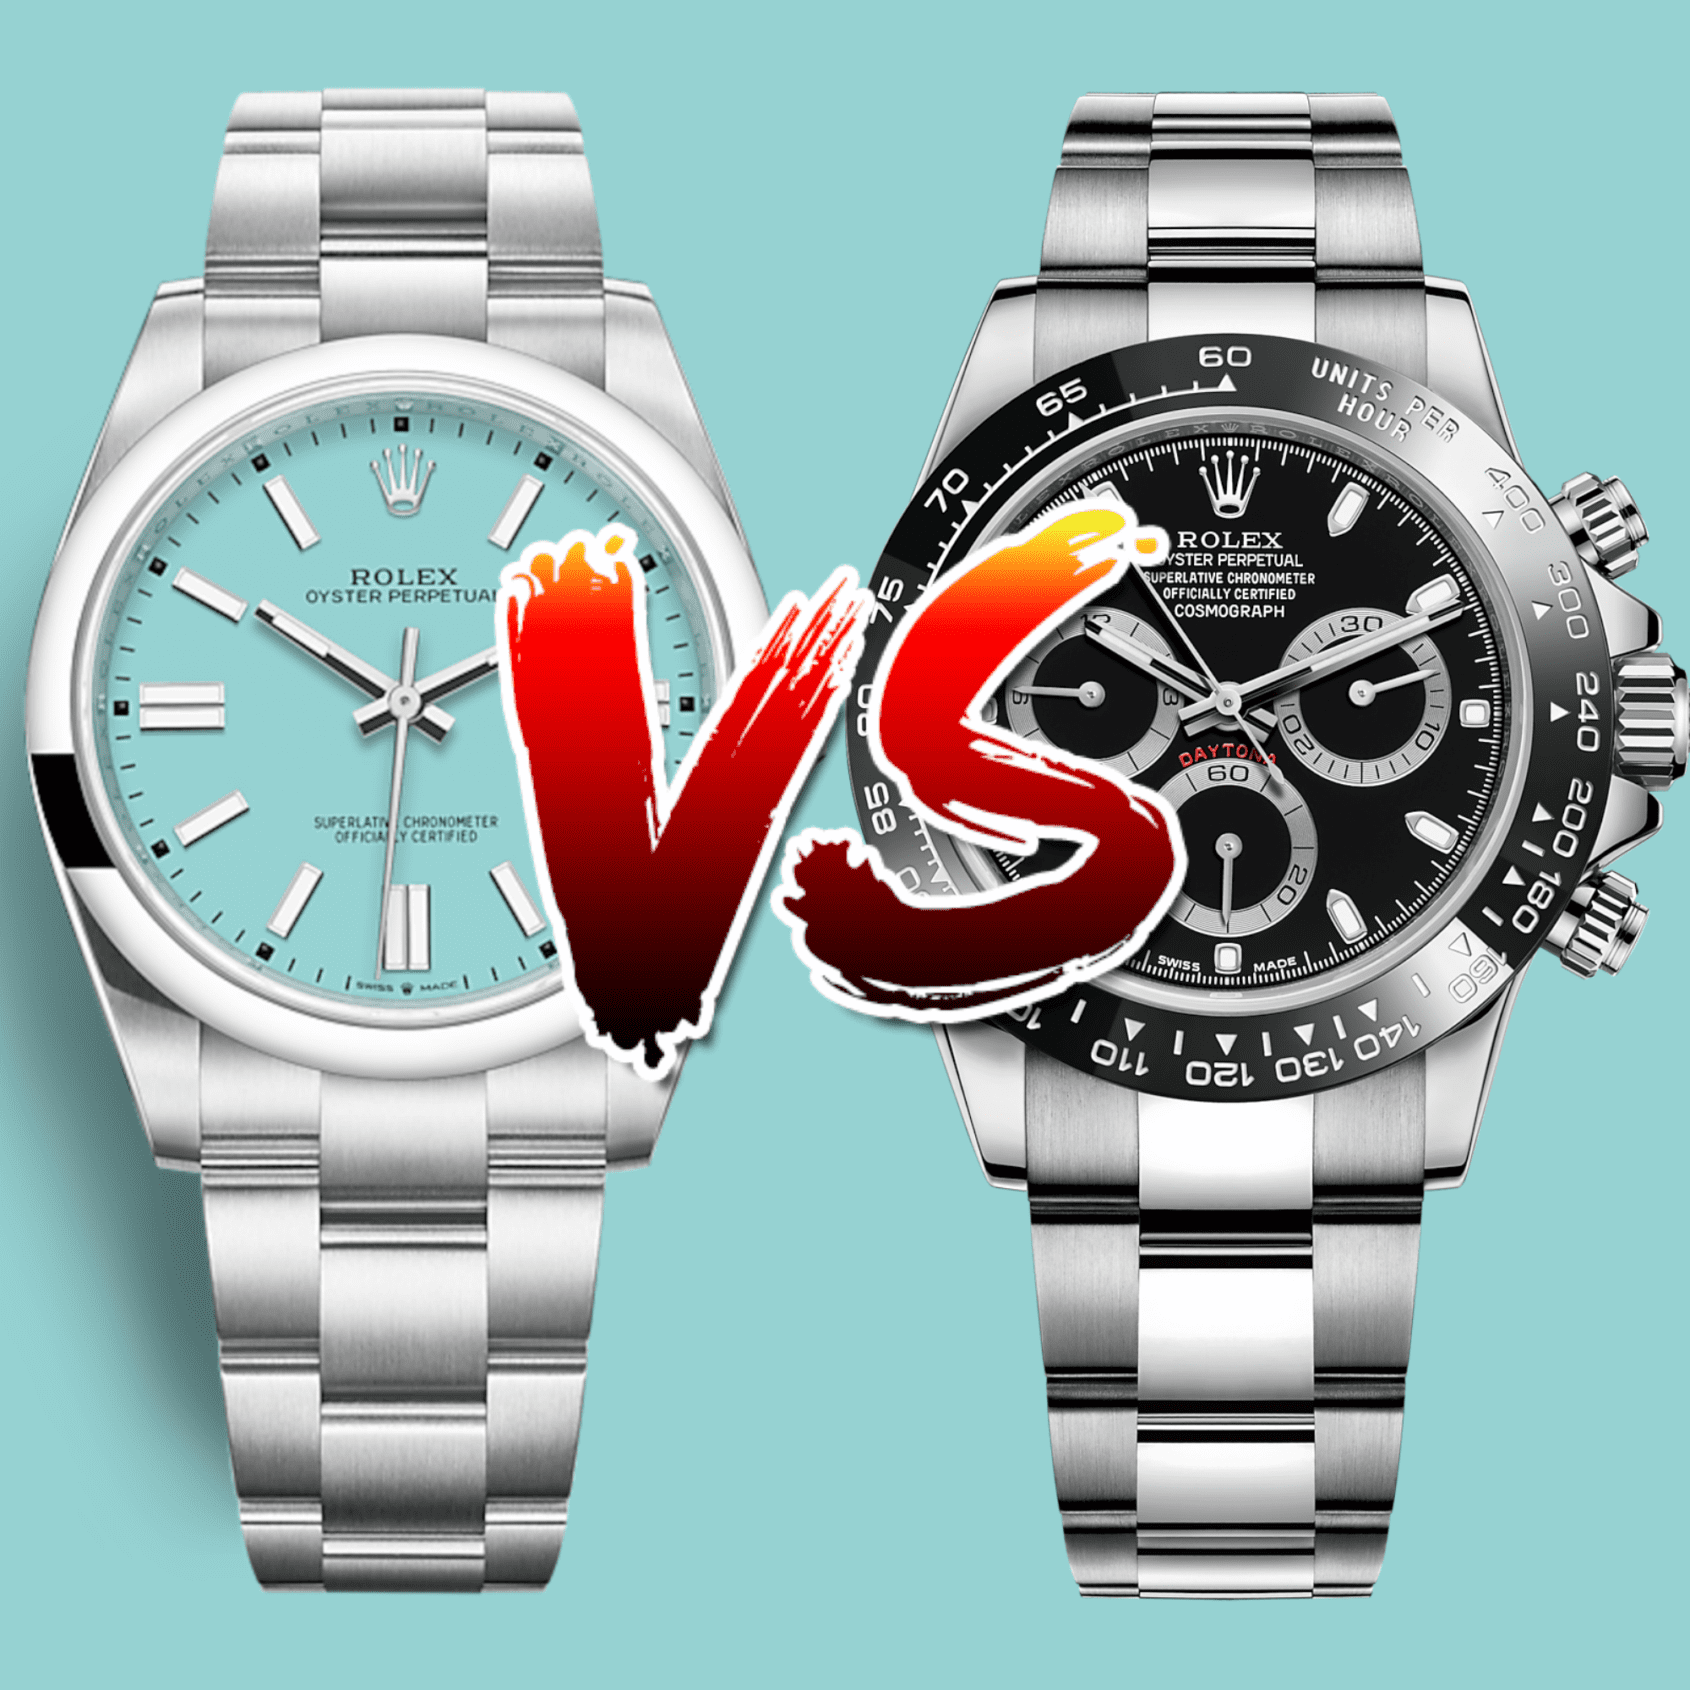 A dealer is offering to trade a black dial ceramic Rolex Daytona for a “Tiffany blue” Rolex OP – what would you do?